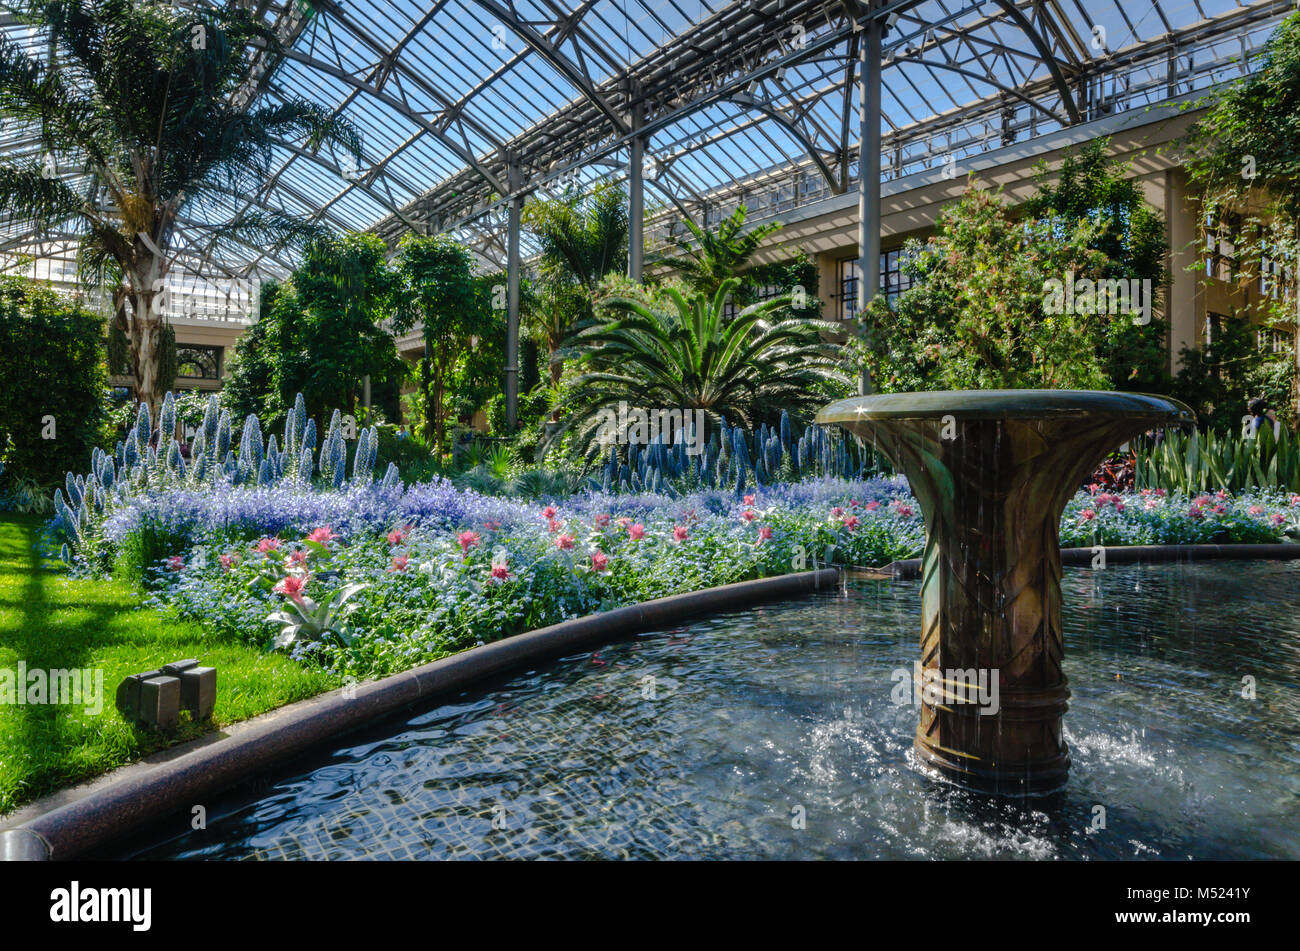 Dramatic greenhouse garden features flowing water fountain and lush display of colorful tropical plants at Longwood Gardens, an American botanical gar Stock Photo